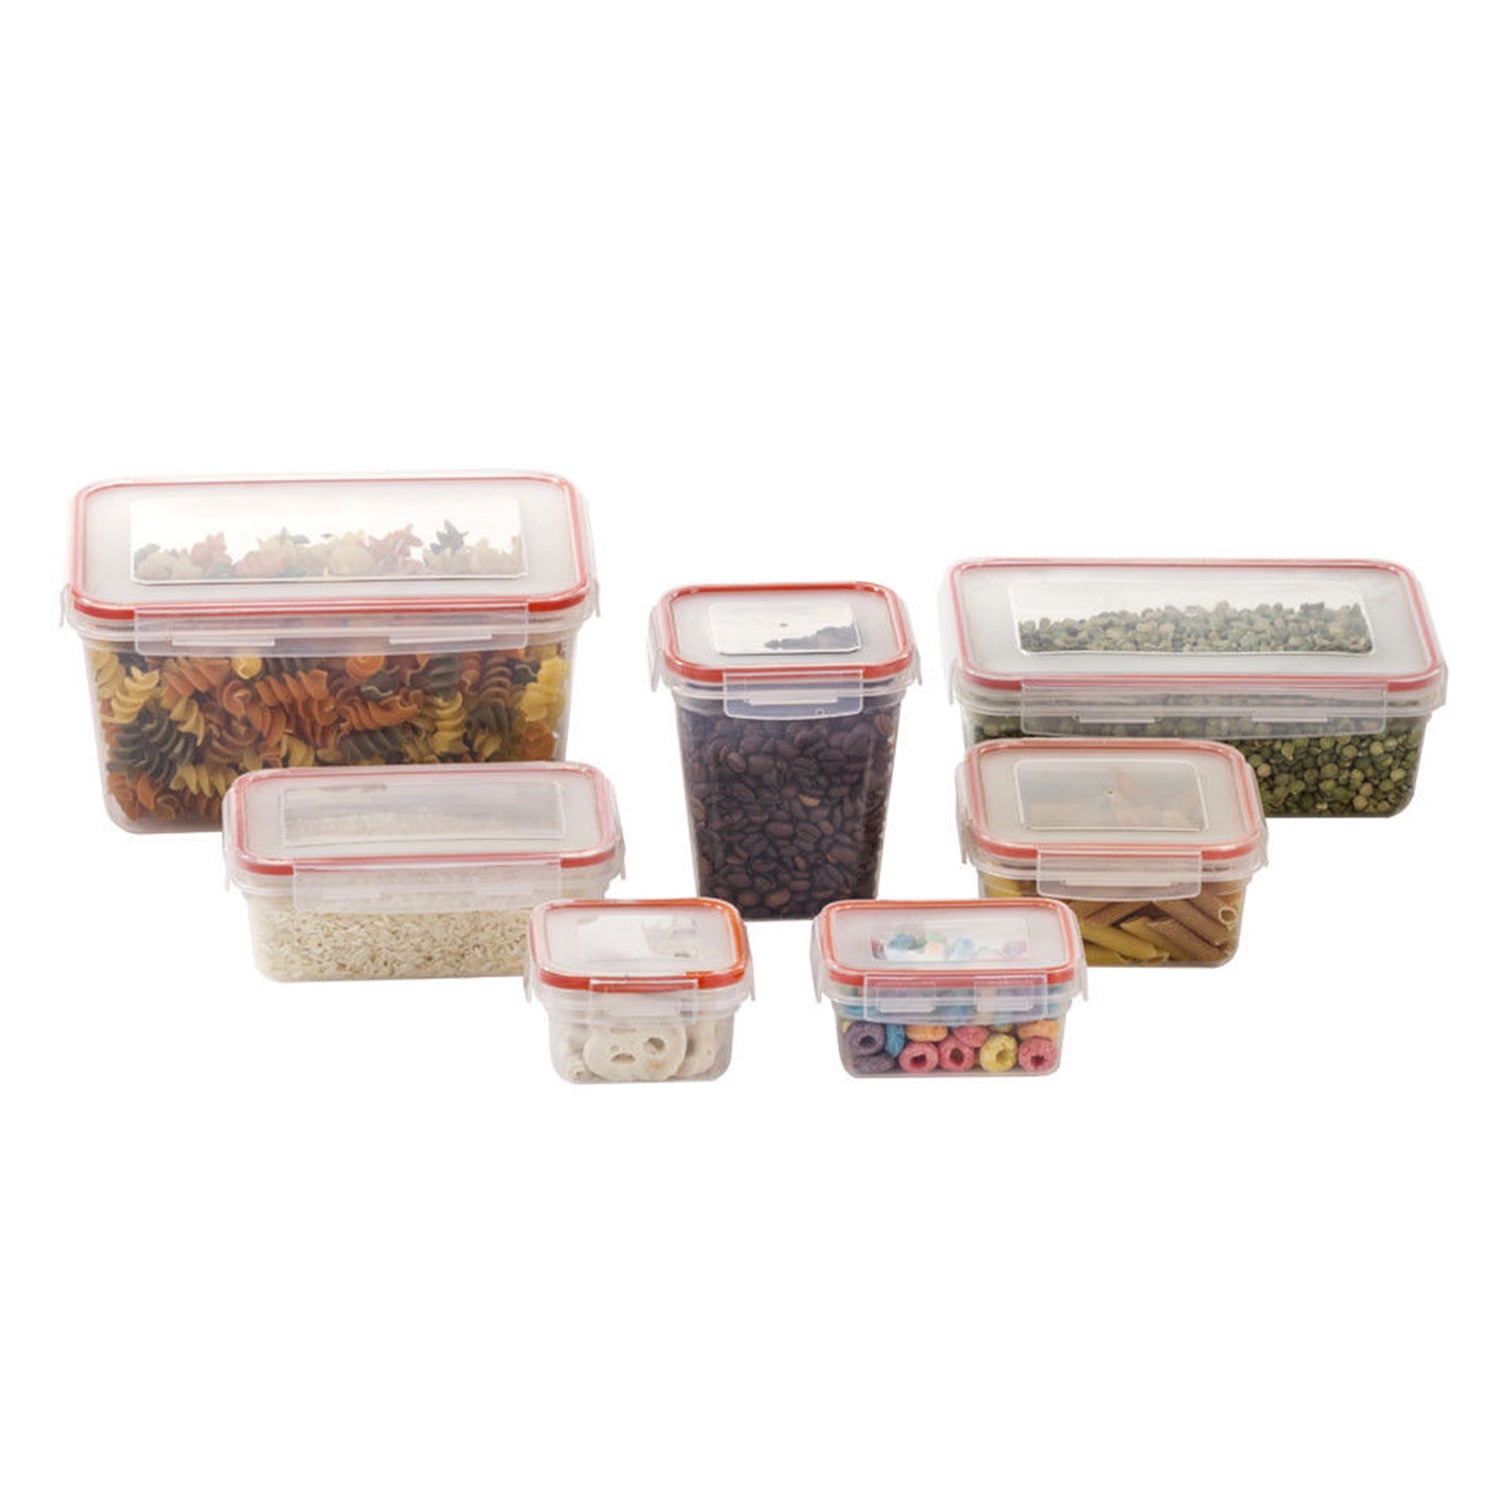 14 Pcs Plastic Food Storage Containers Set With Air Tight Locking Lids